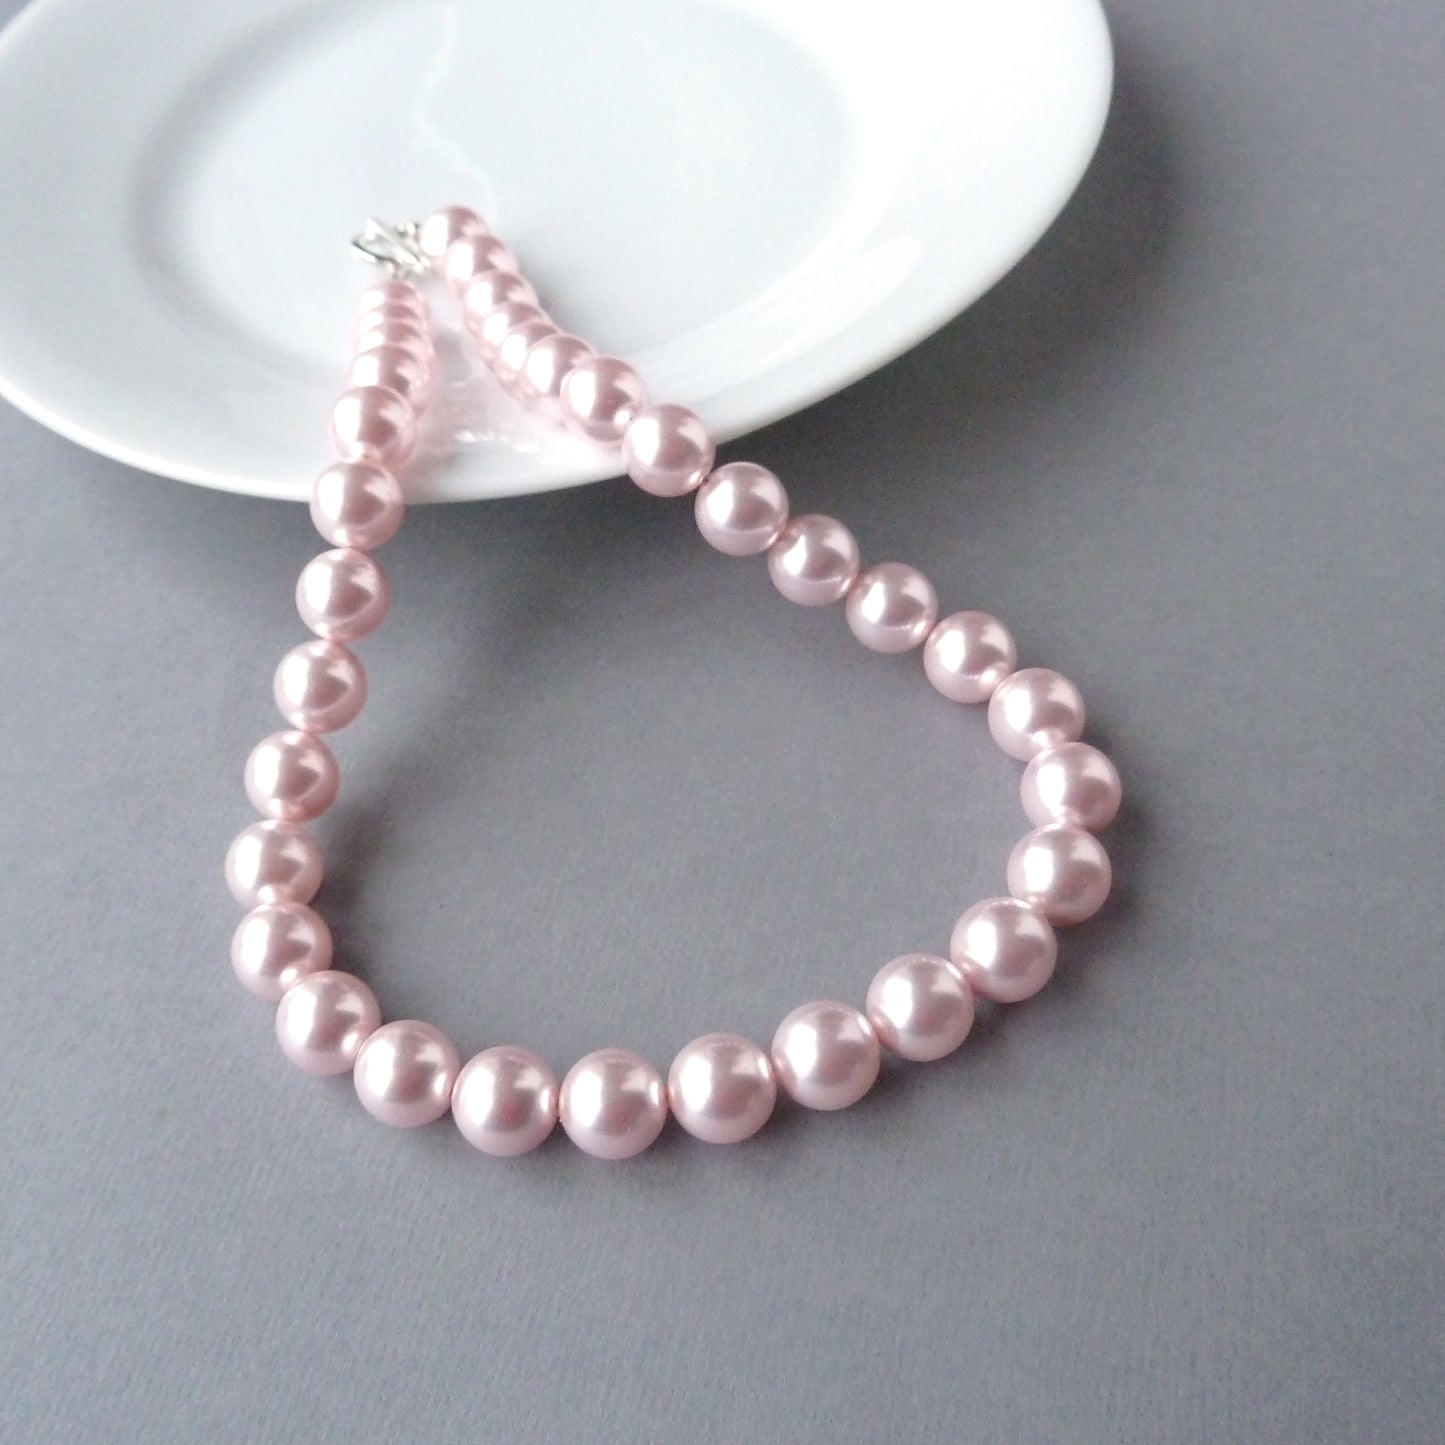 Blush pink mother of the groom necklace